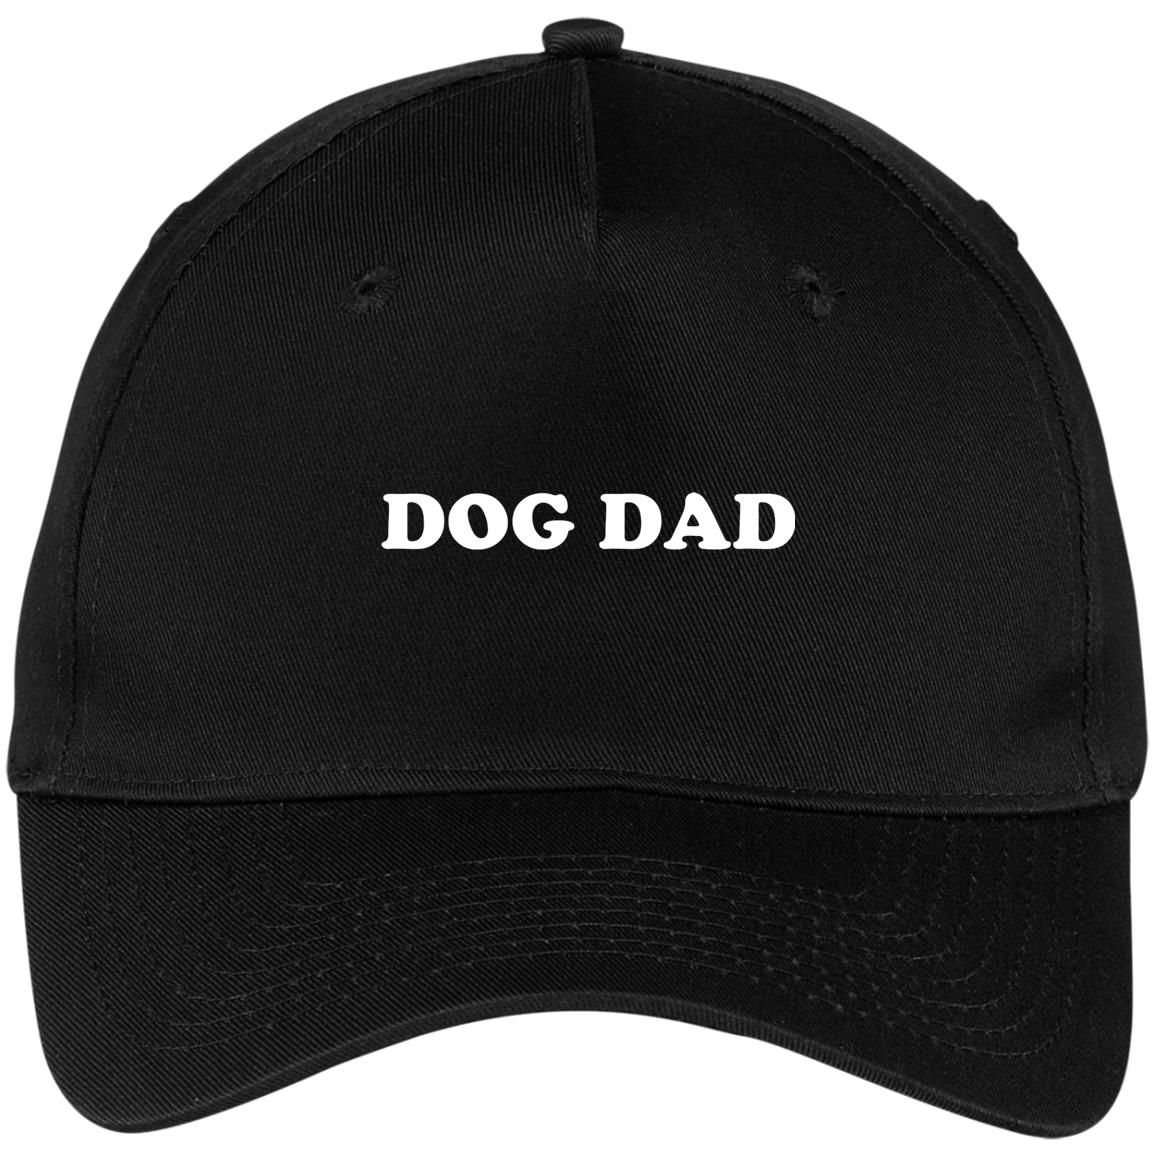 Dog Dat Embroidered Hat Style: CP86 Five Panel Twill Cap, Color: Black